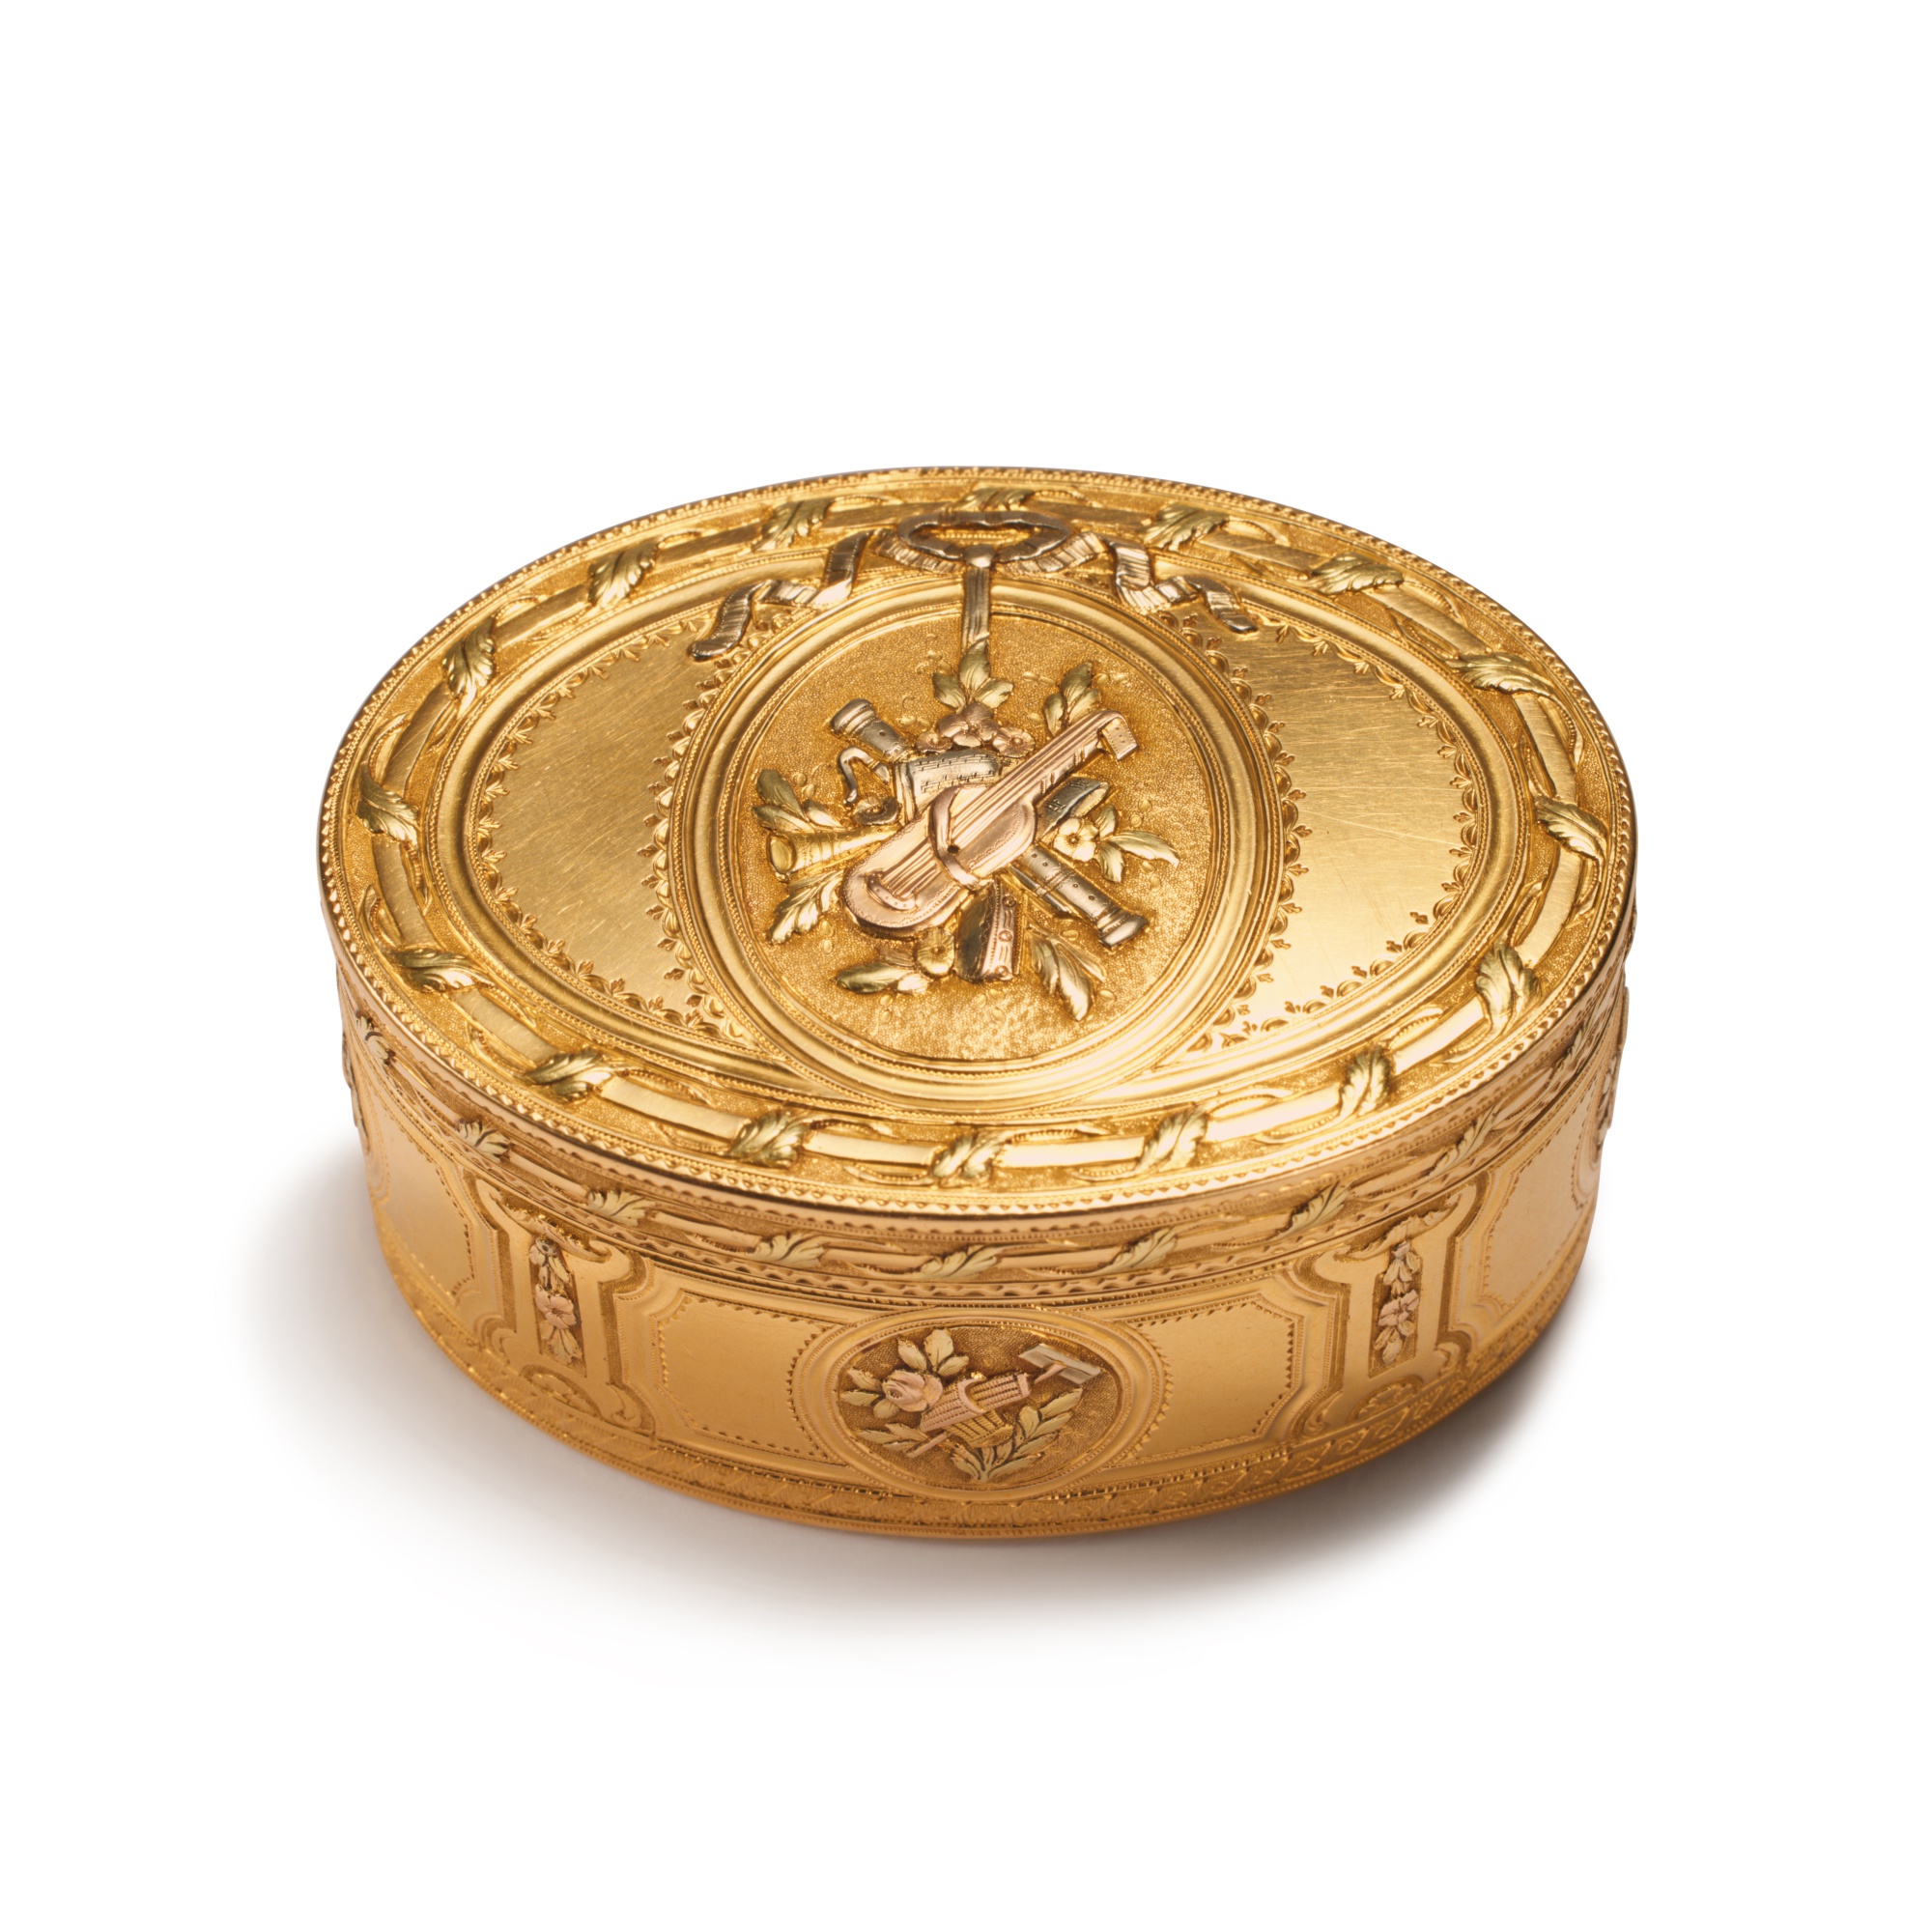 A Louis XV Vari-Color Gold Oval Snuff Box, Pierre-Fran&#231;ois Royer, Paris, 1769, with the Charge - Image 2 of 5